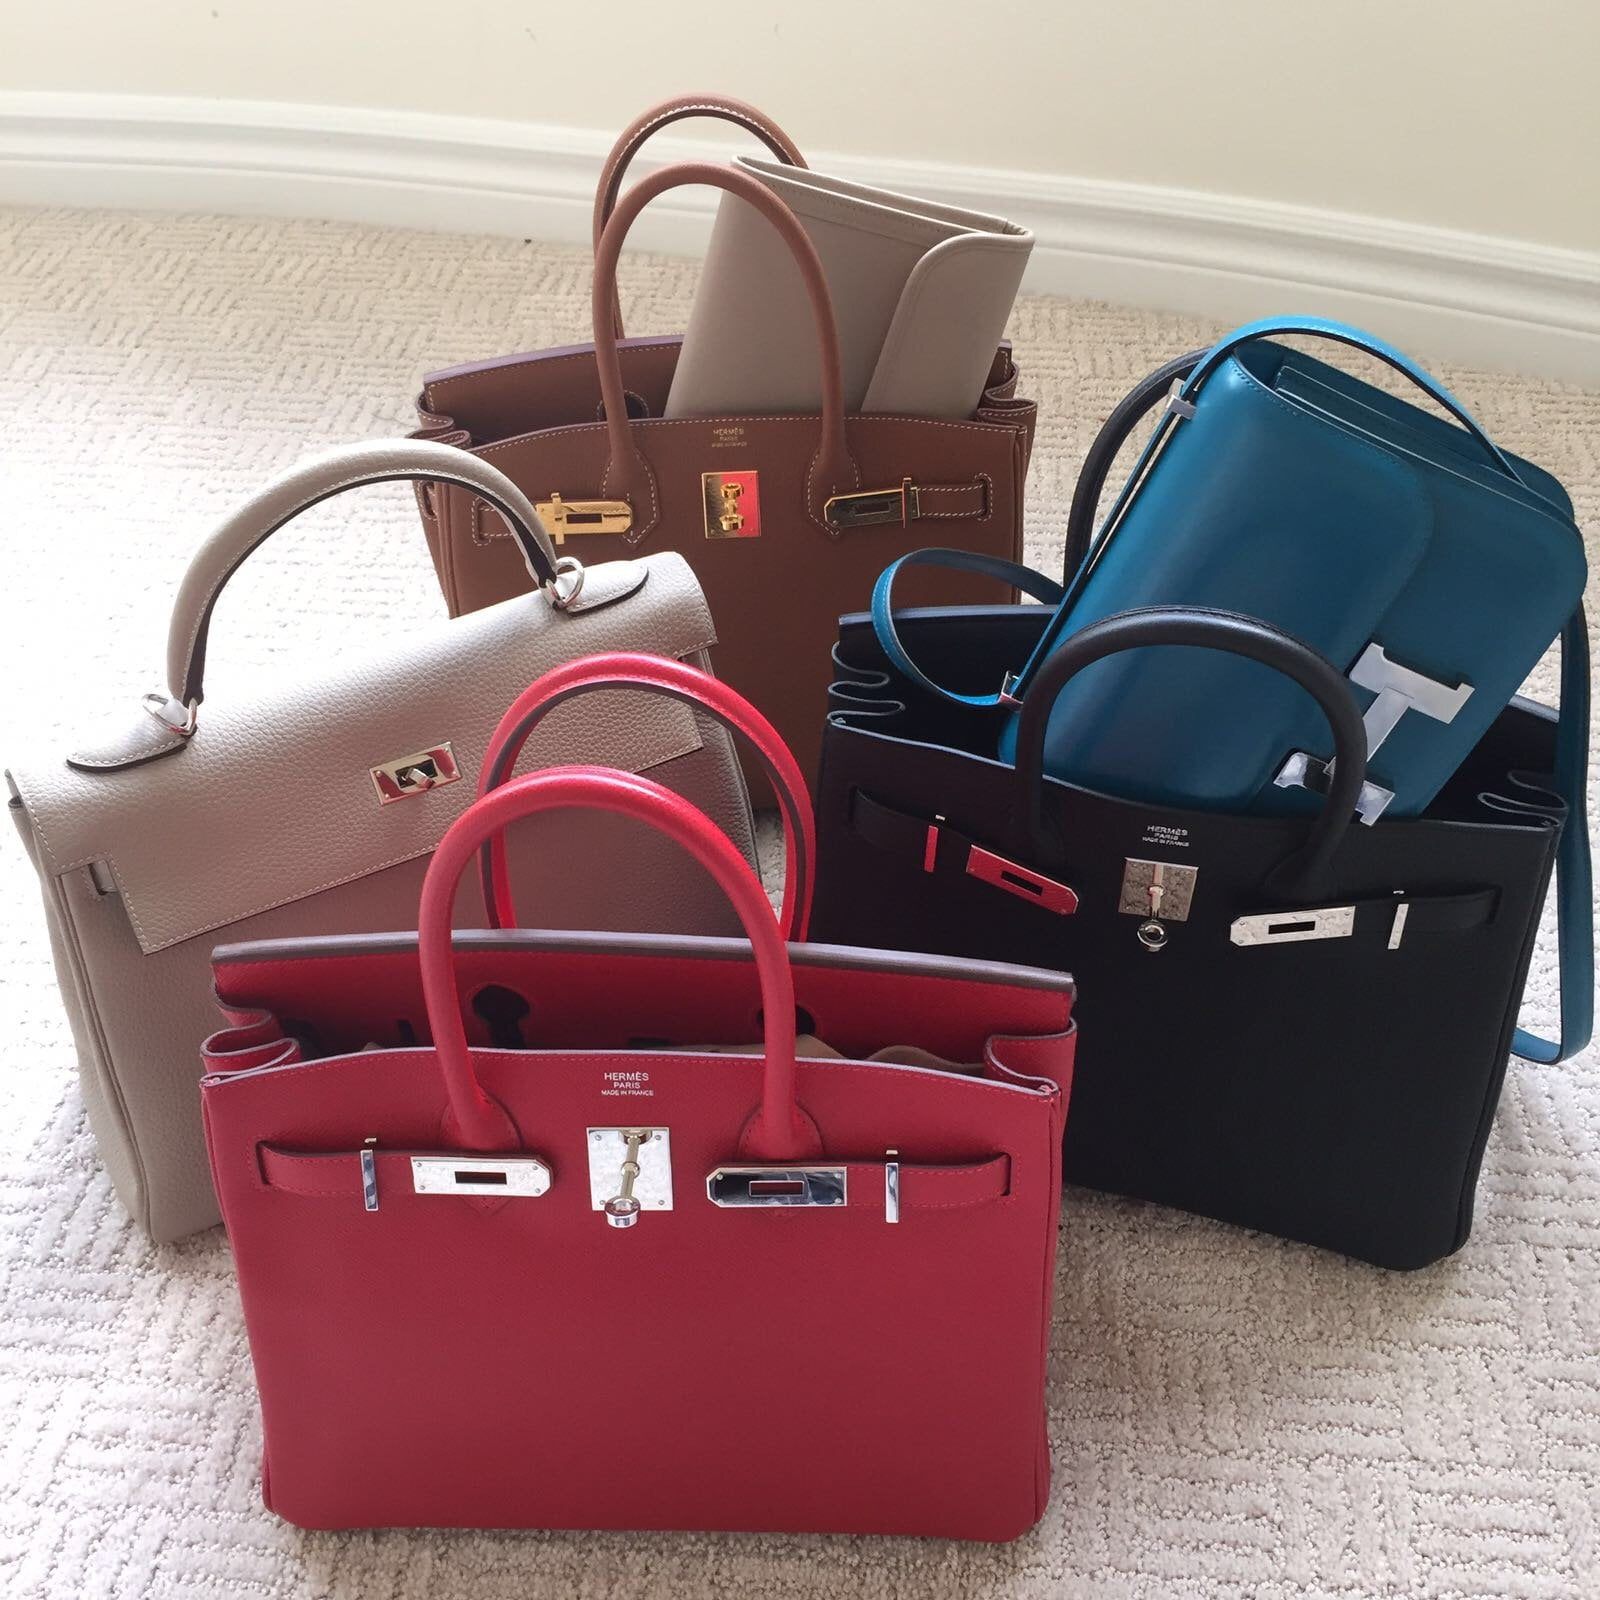 10 Things You Might Not Know About the Hermès Birkin - PurseBlog